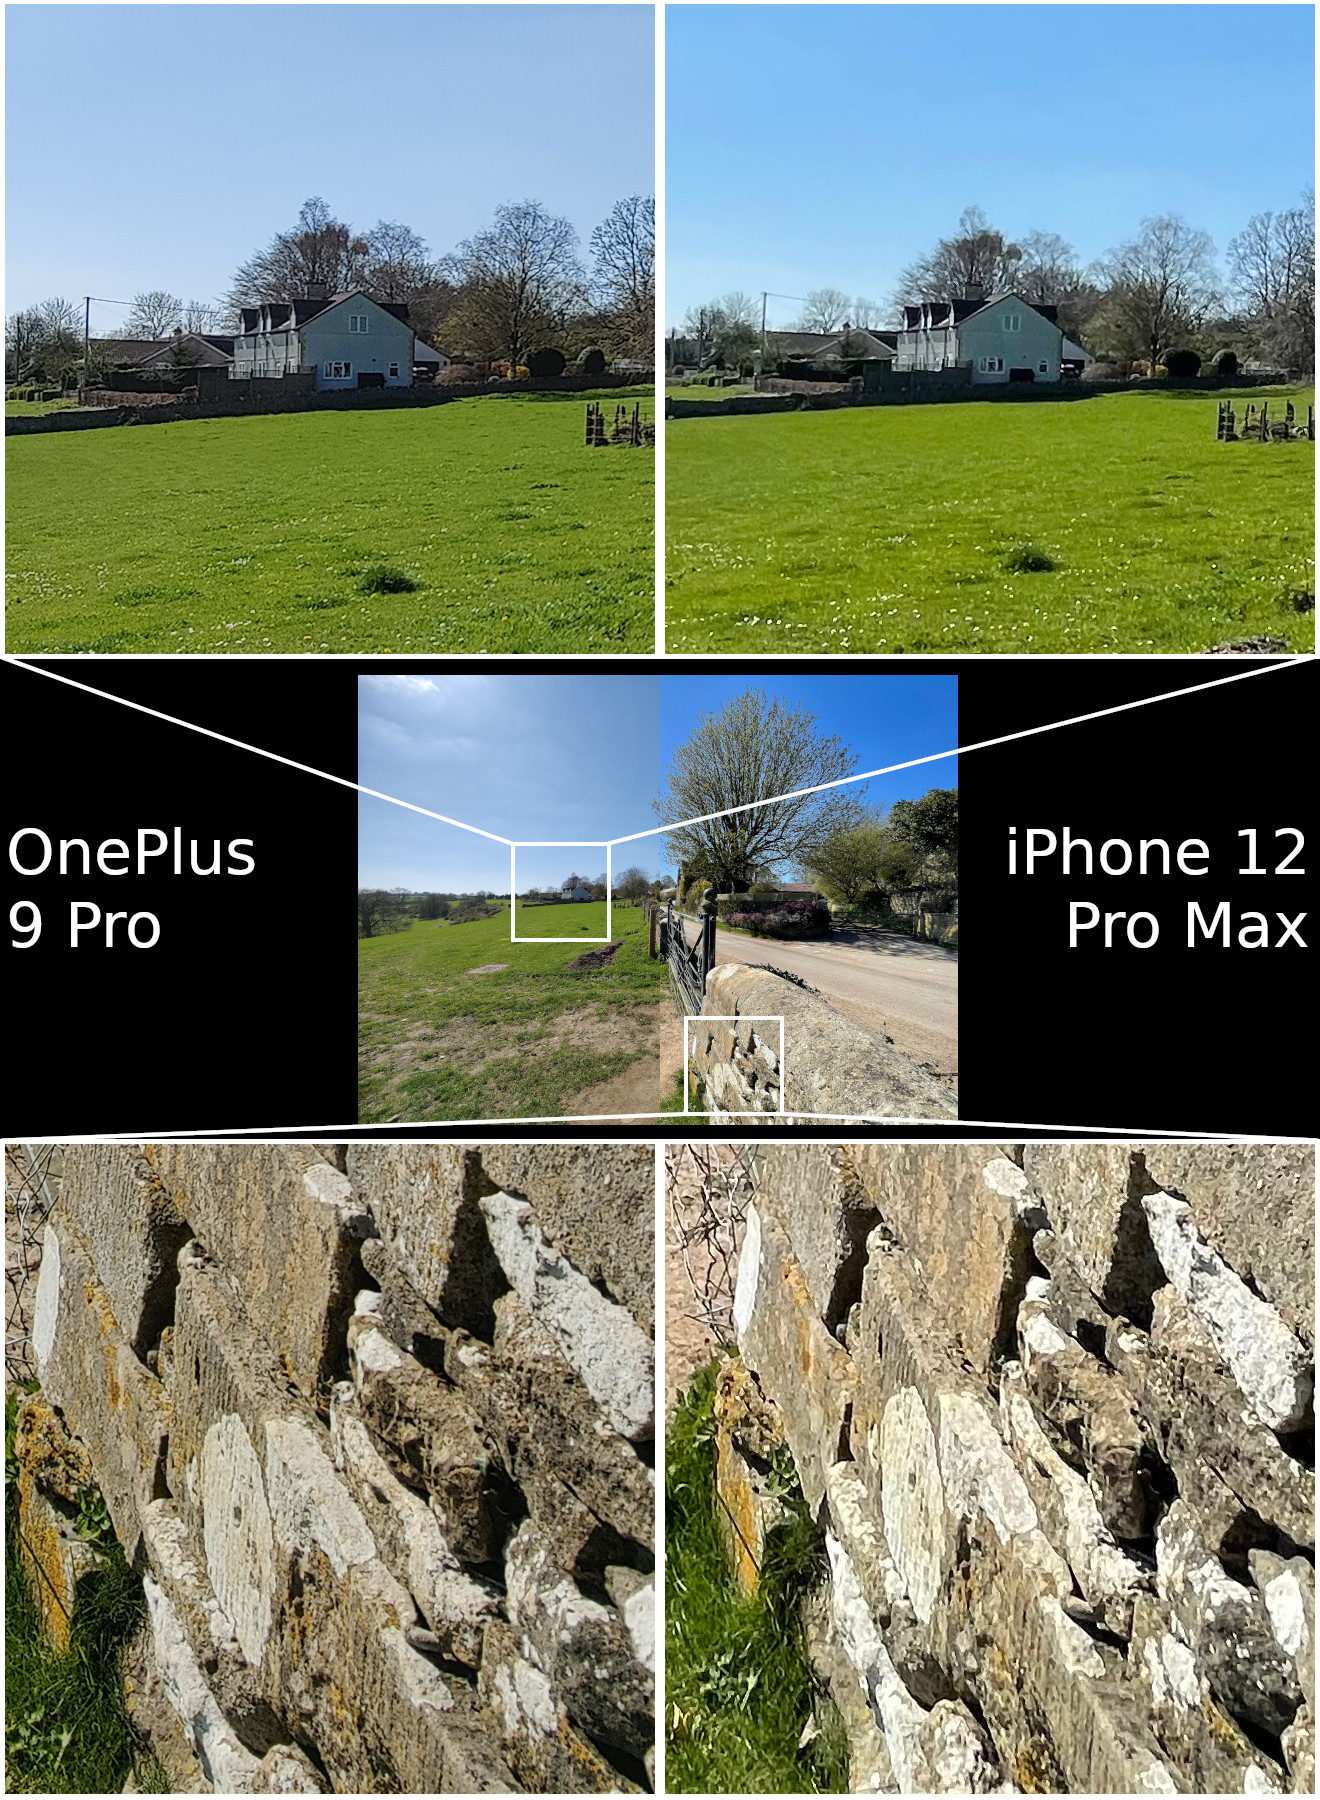 OnePlus 9 Pro vs iPhone 12 Pro Max wide angle